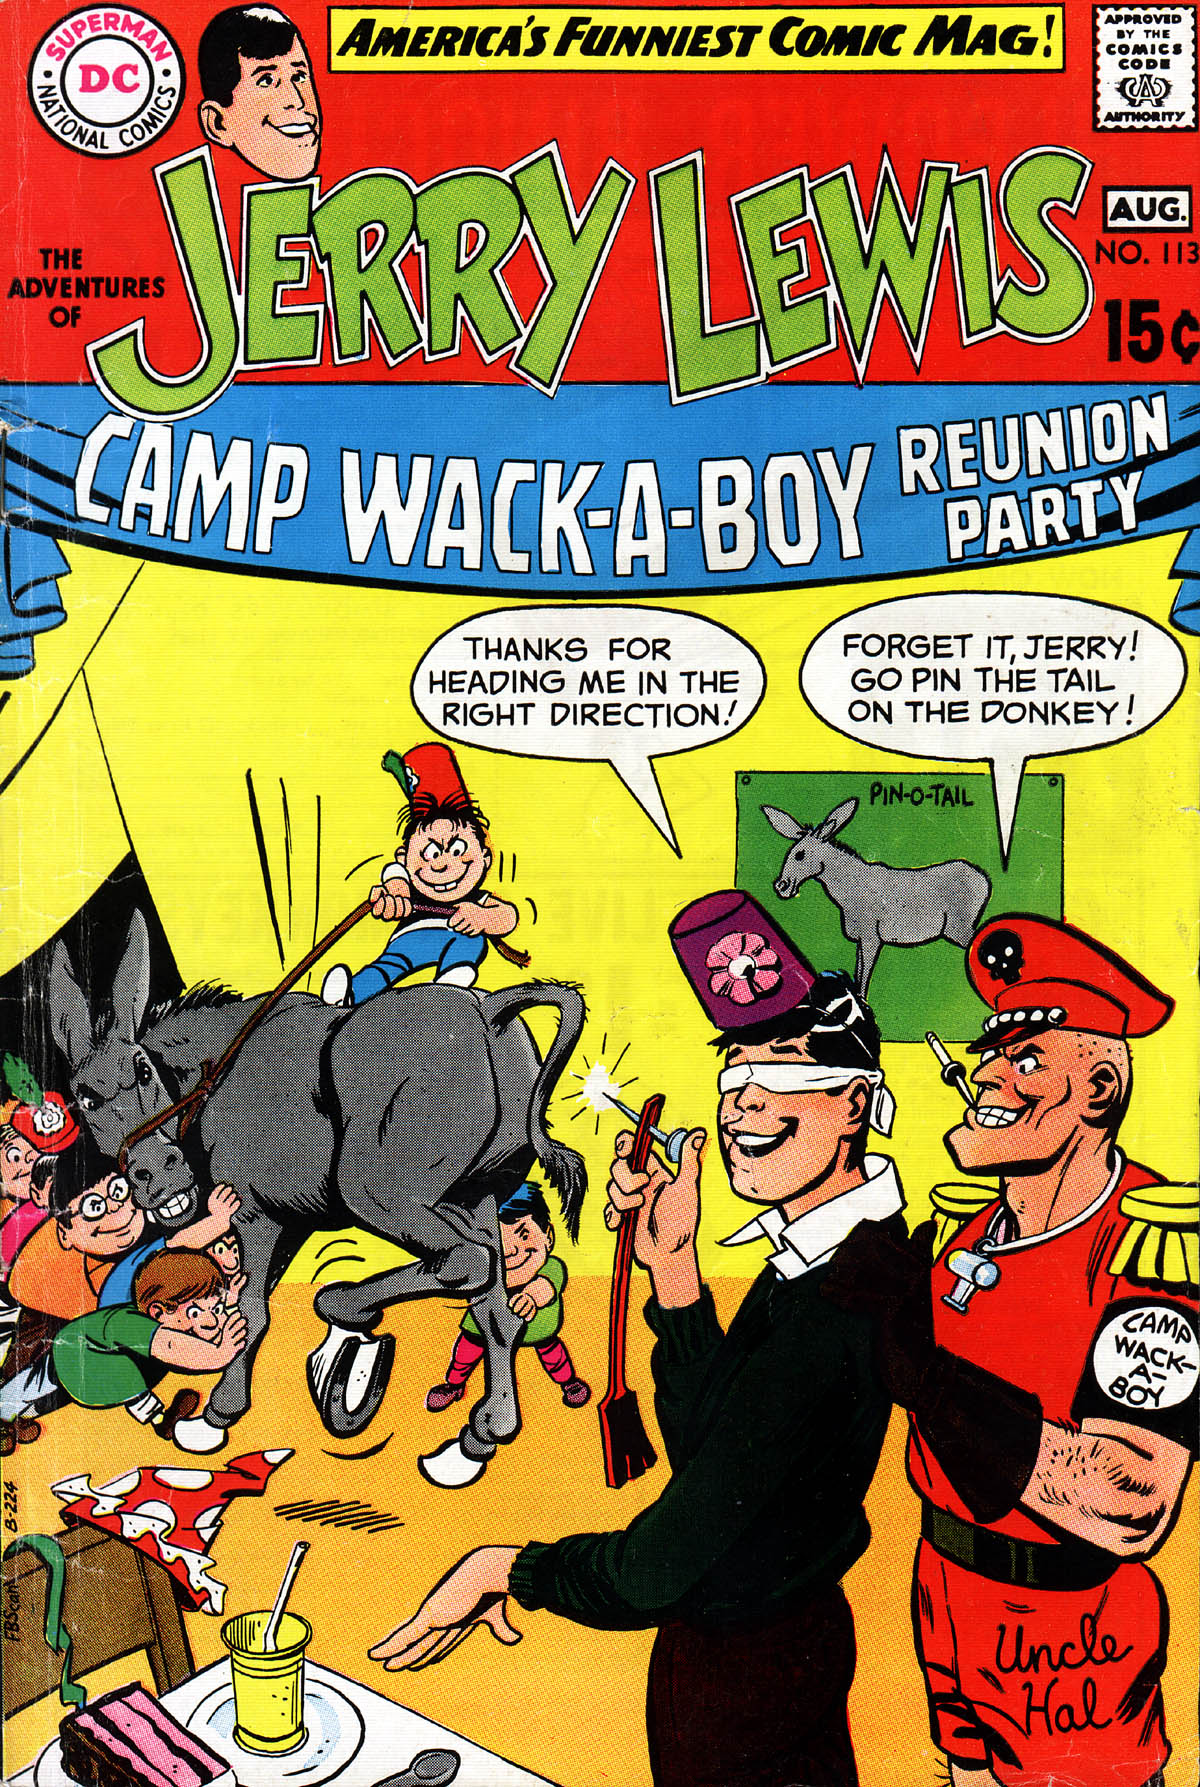 Read online The Adventures of Jerry Lewis comic -  Issue #113 - 1